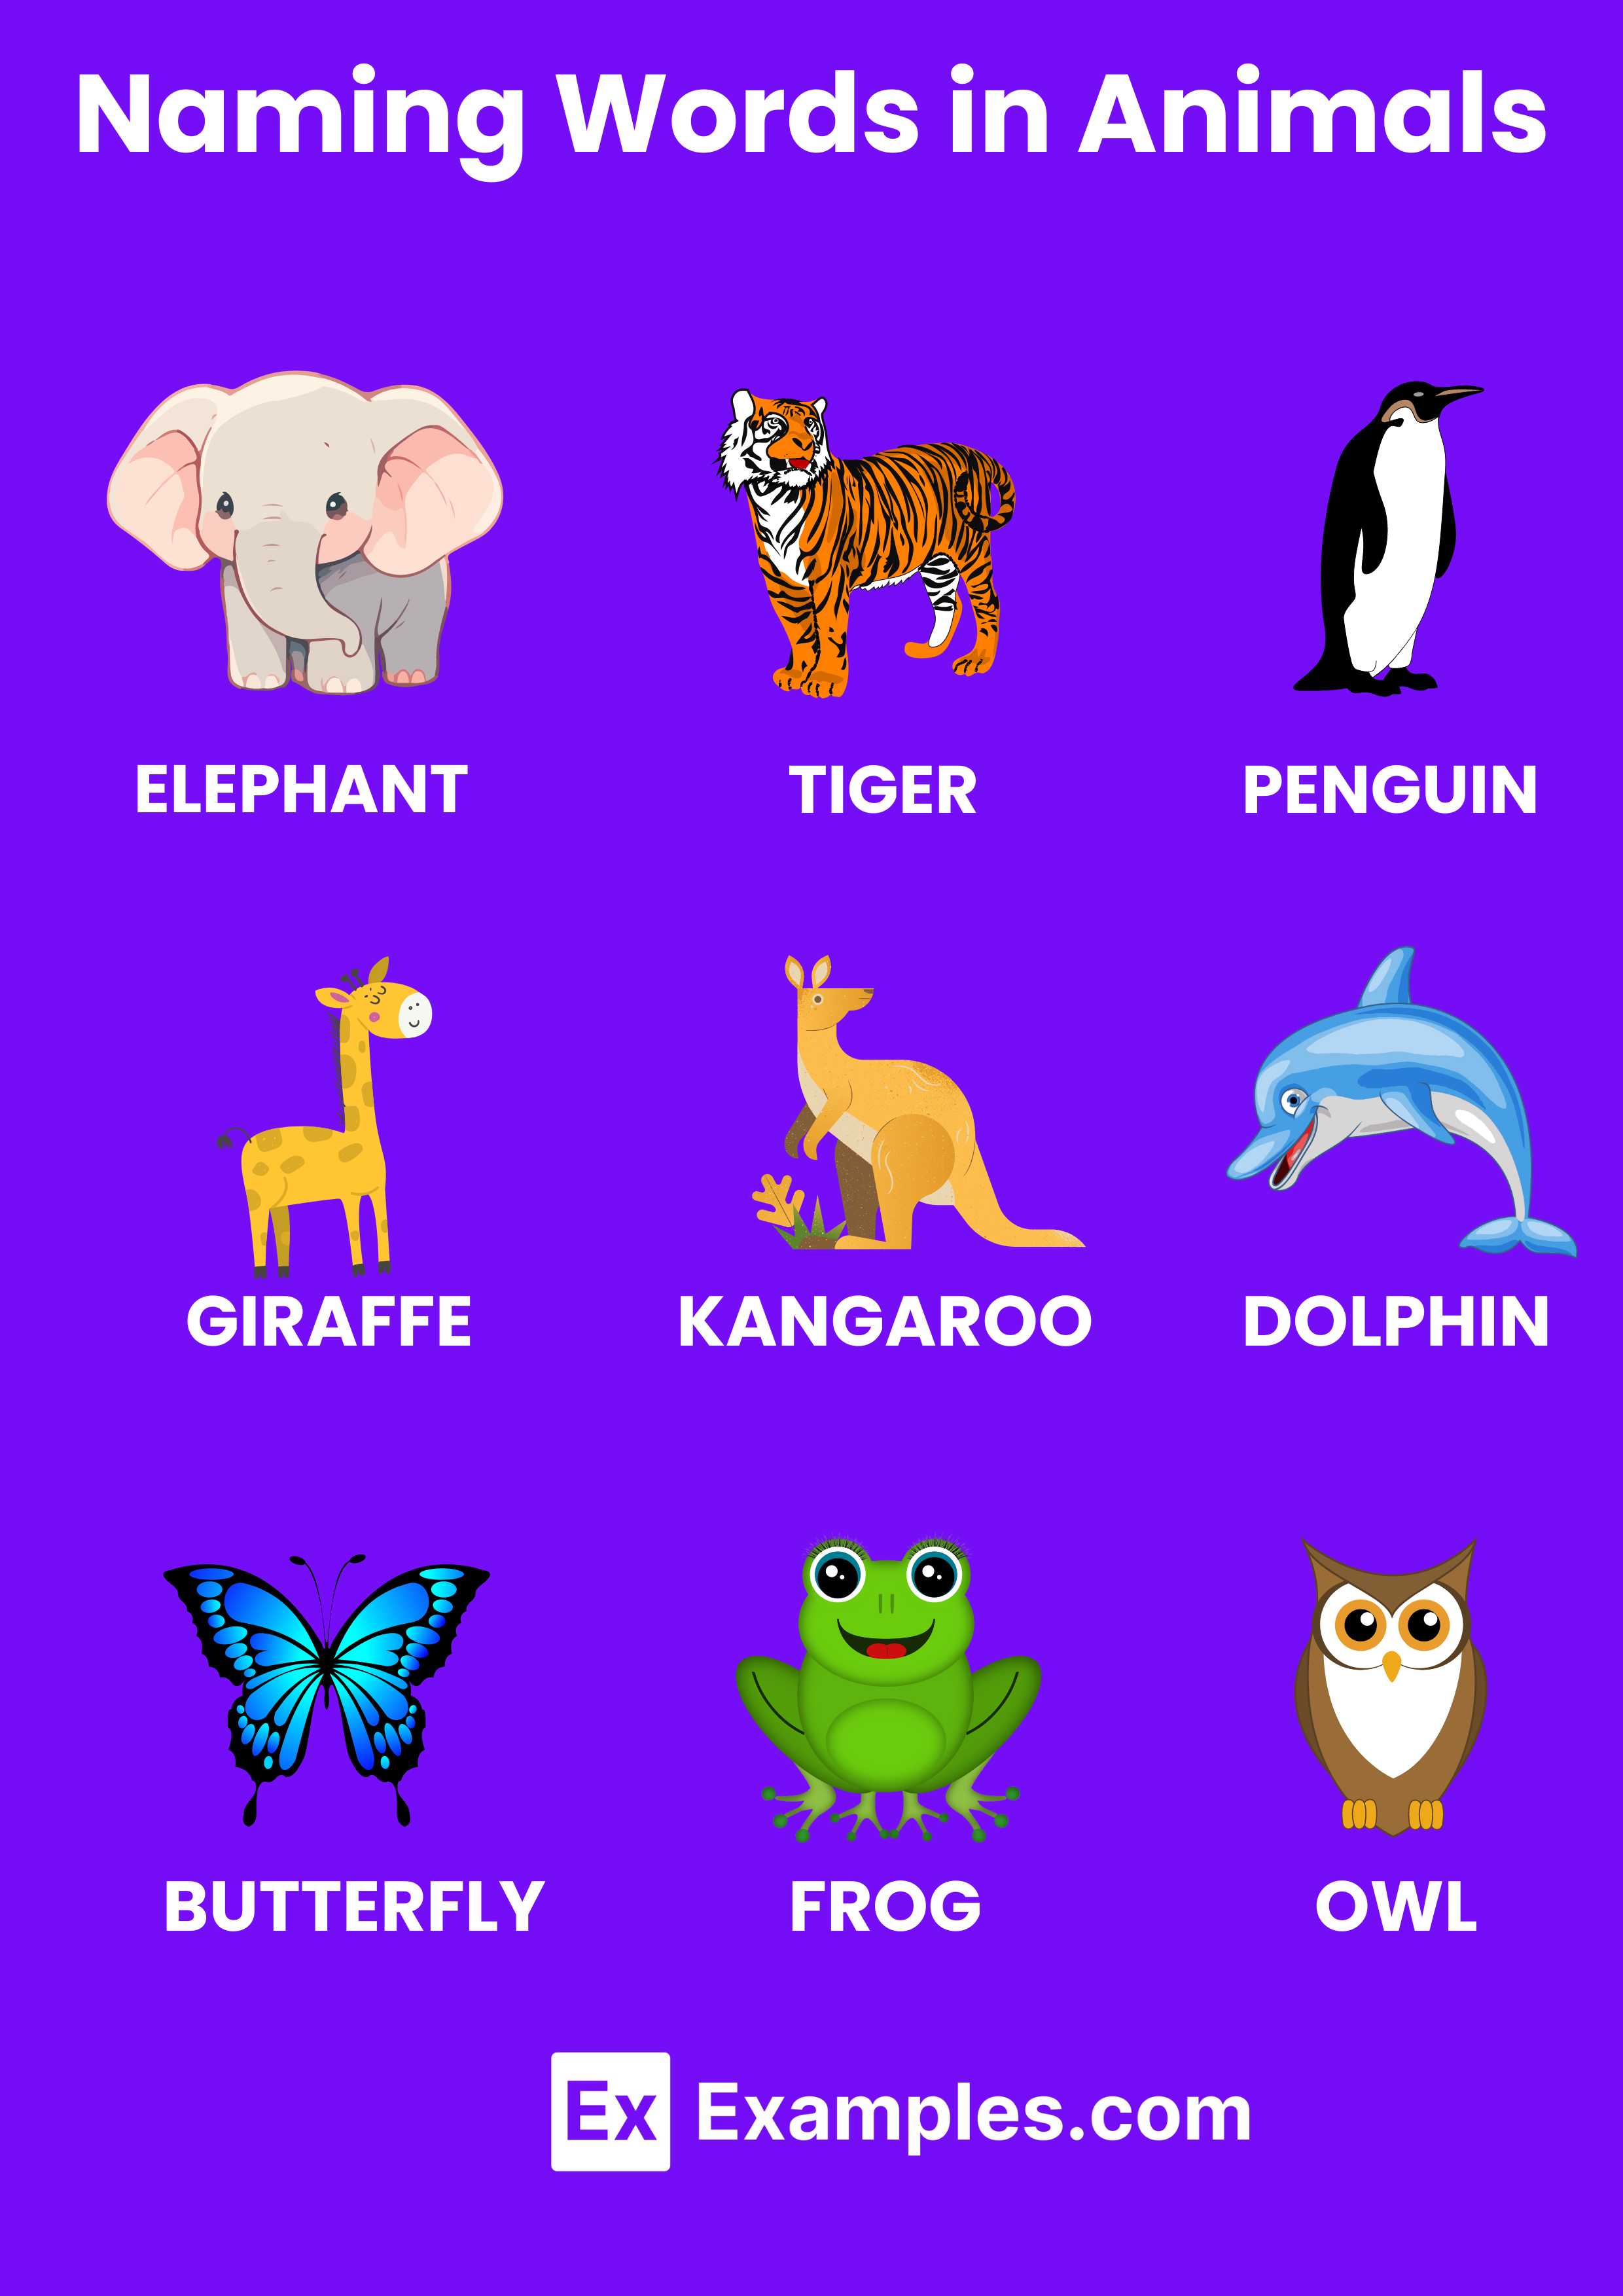 Naming Words in Animals